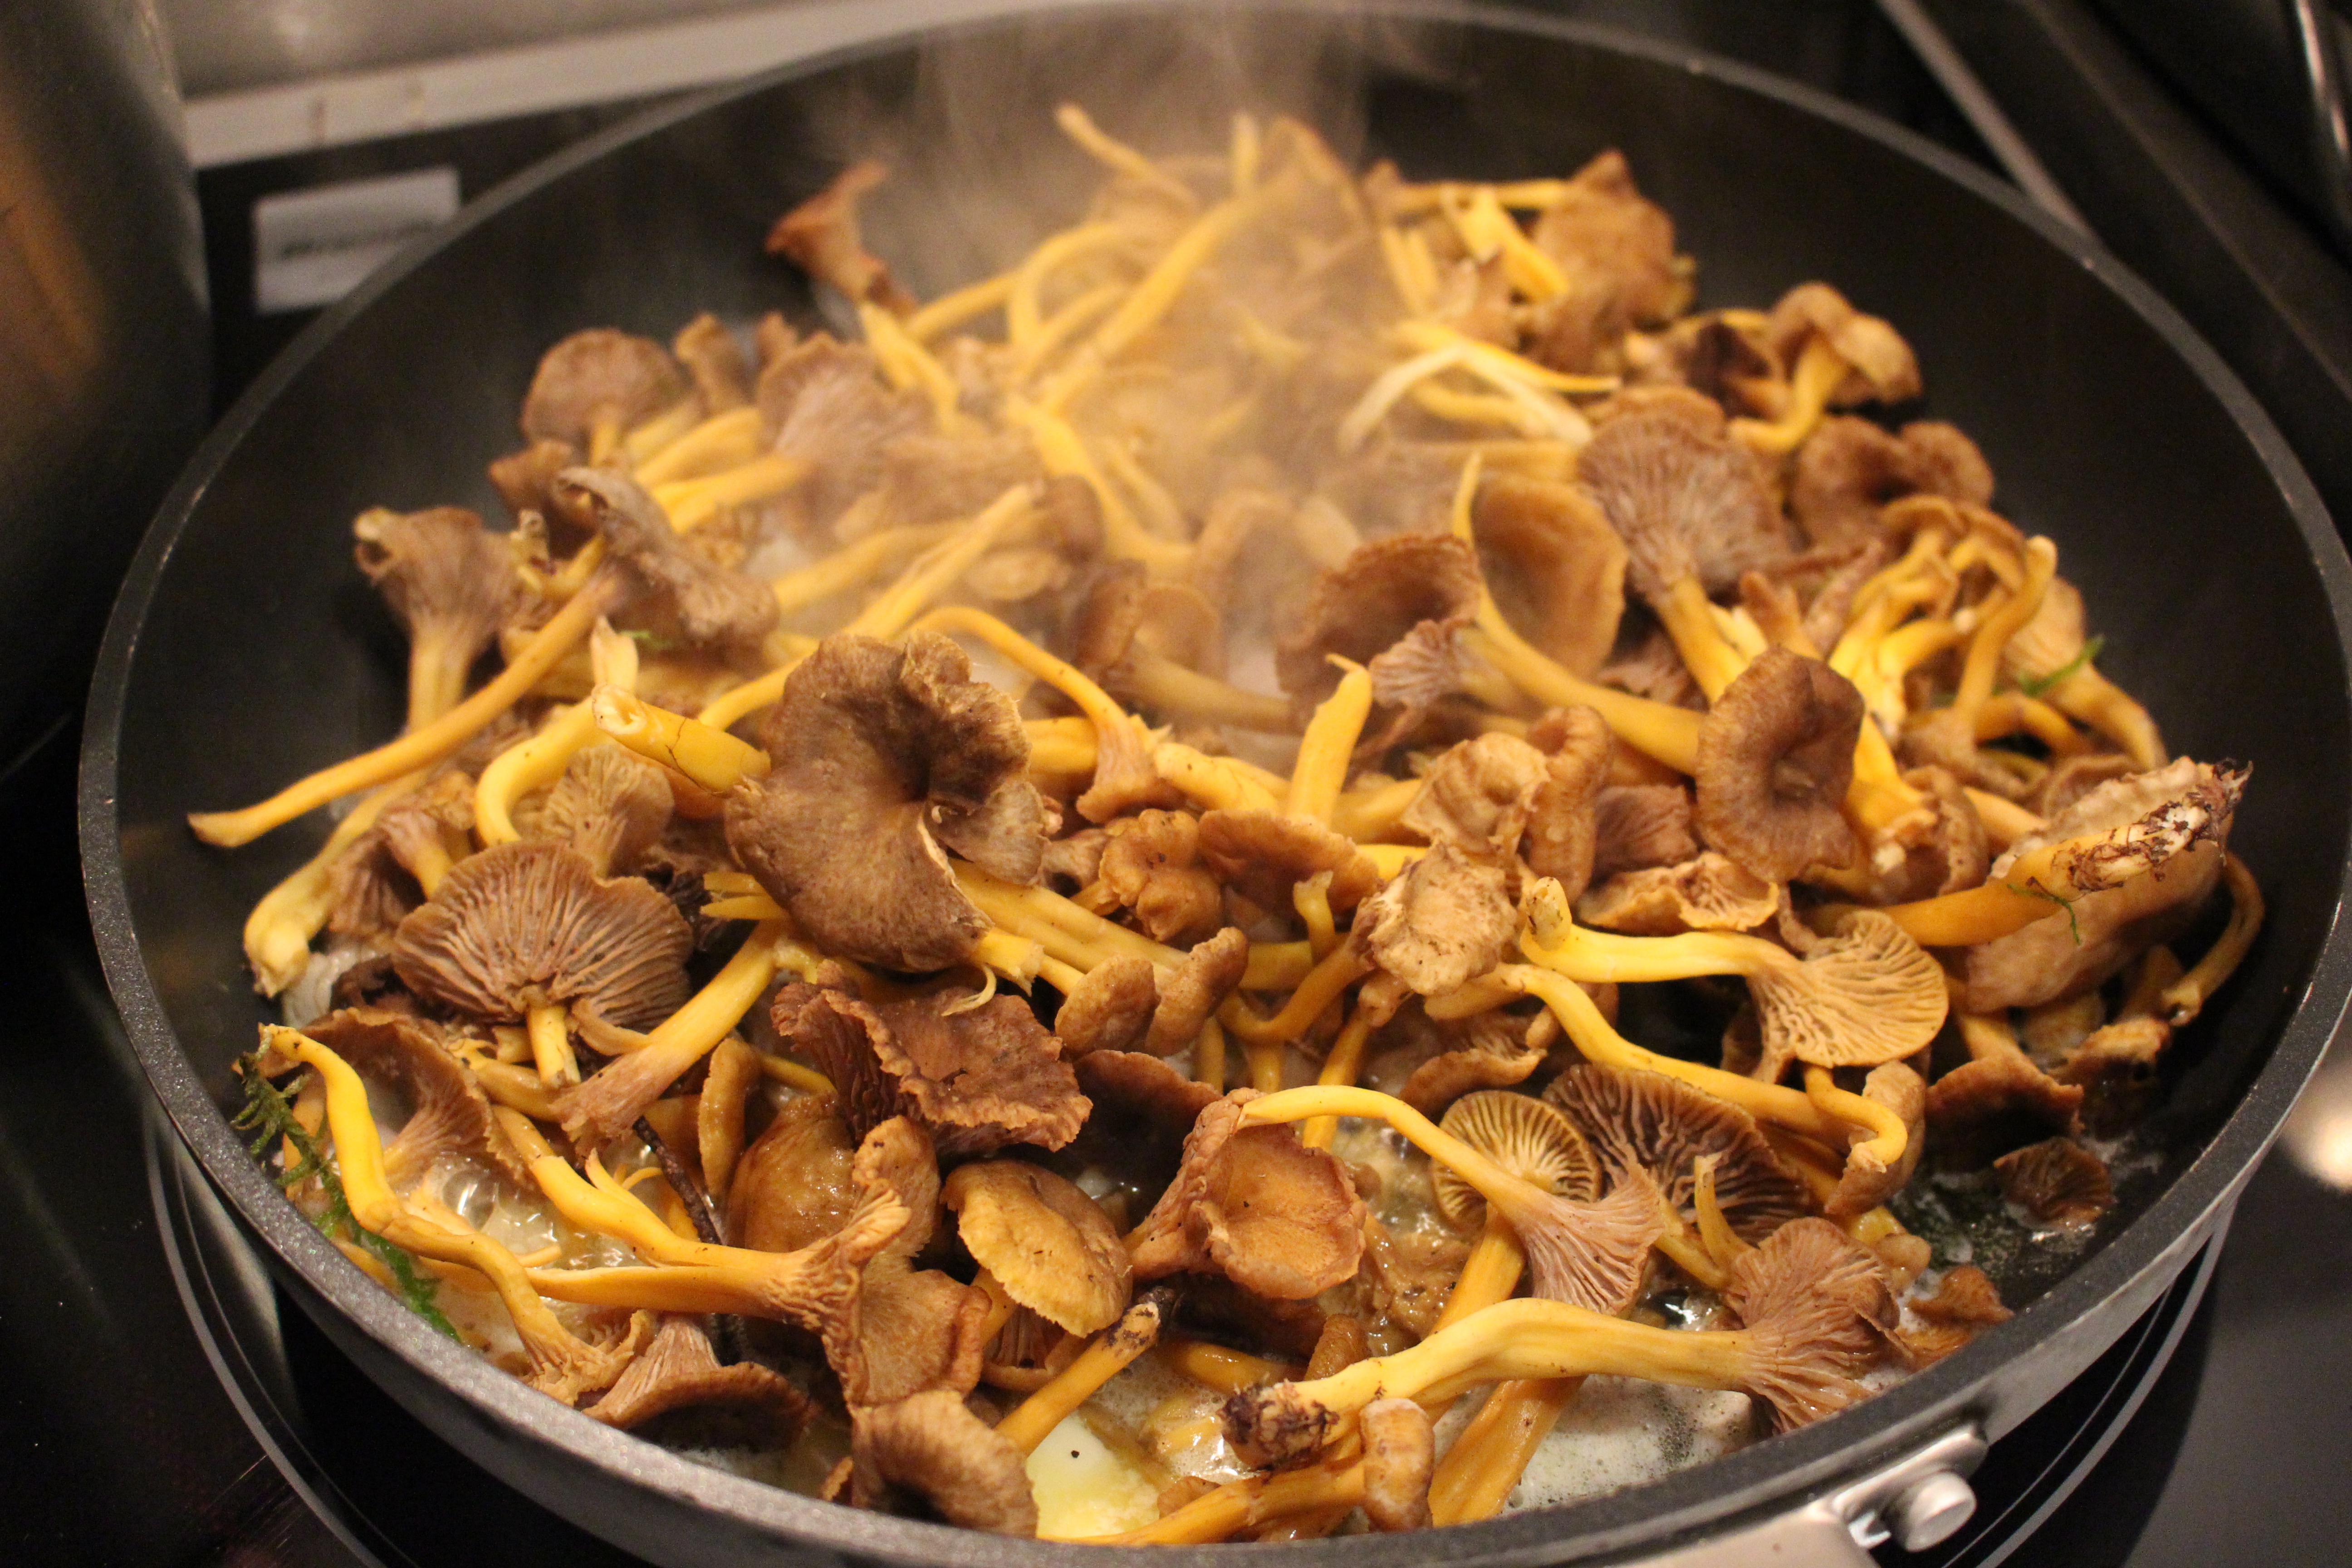 Chanterelle Mushrooms from the market